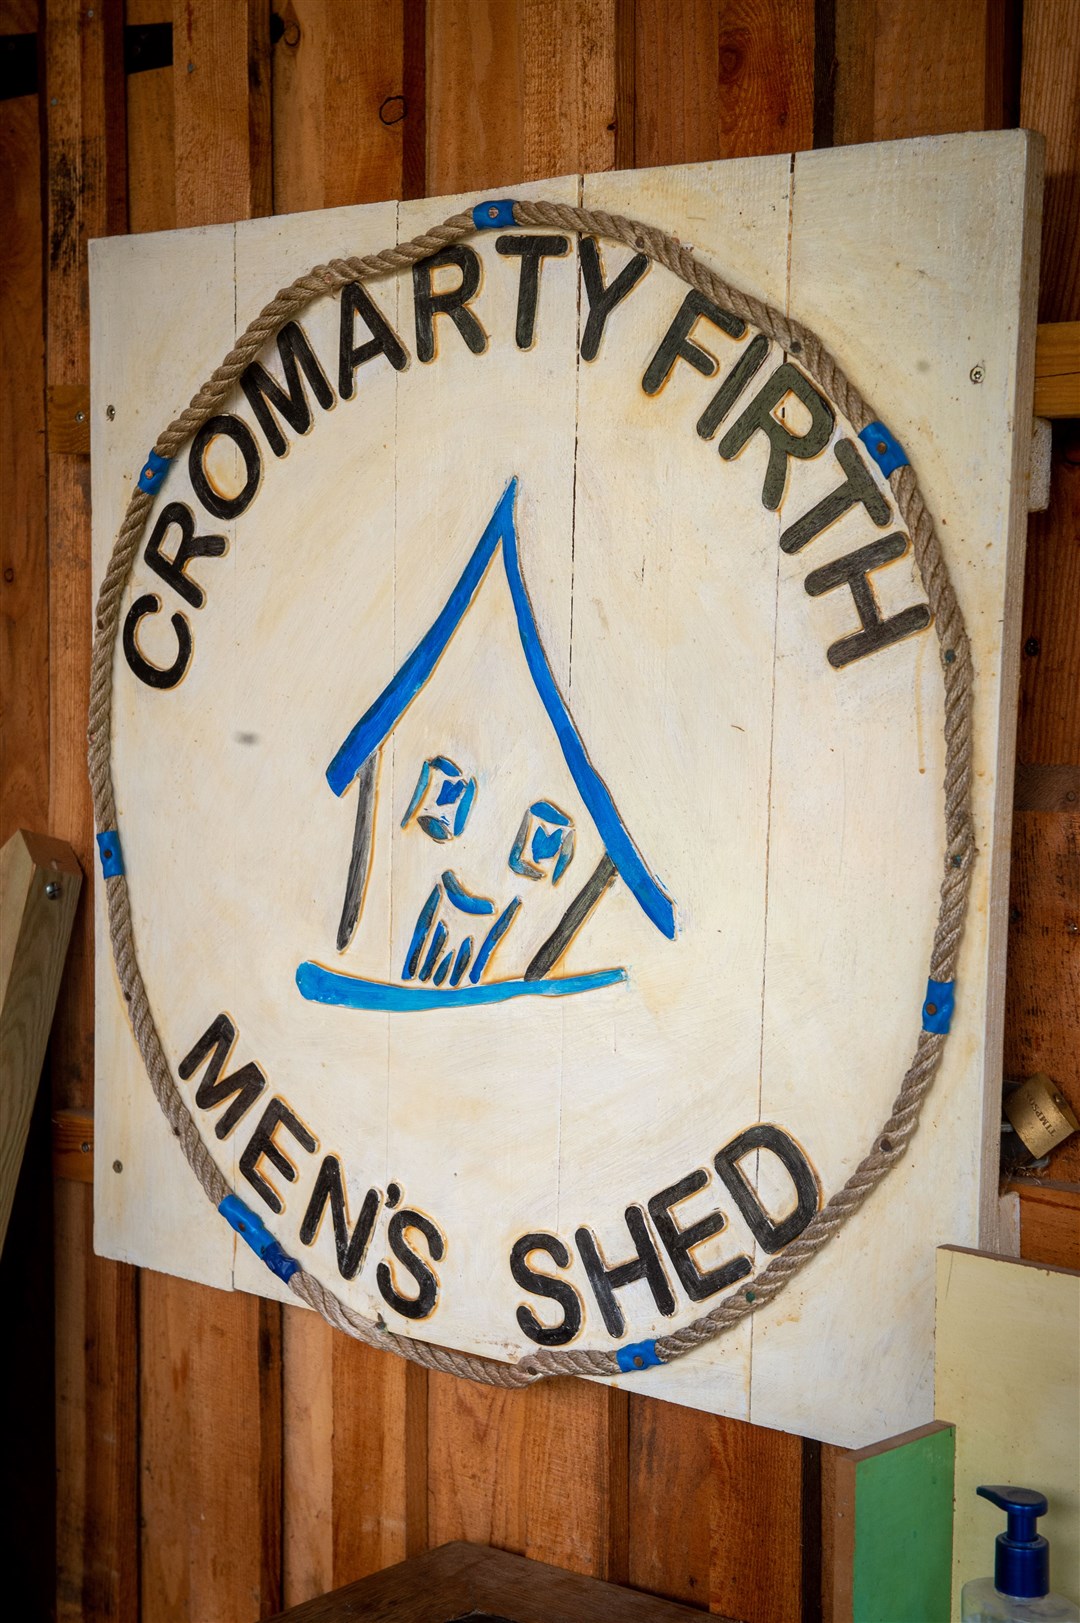 Cromarty Firth Men's Shed in Milton is keen to reach out to the community.